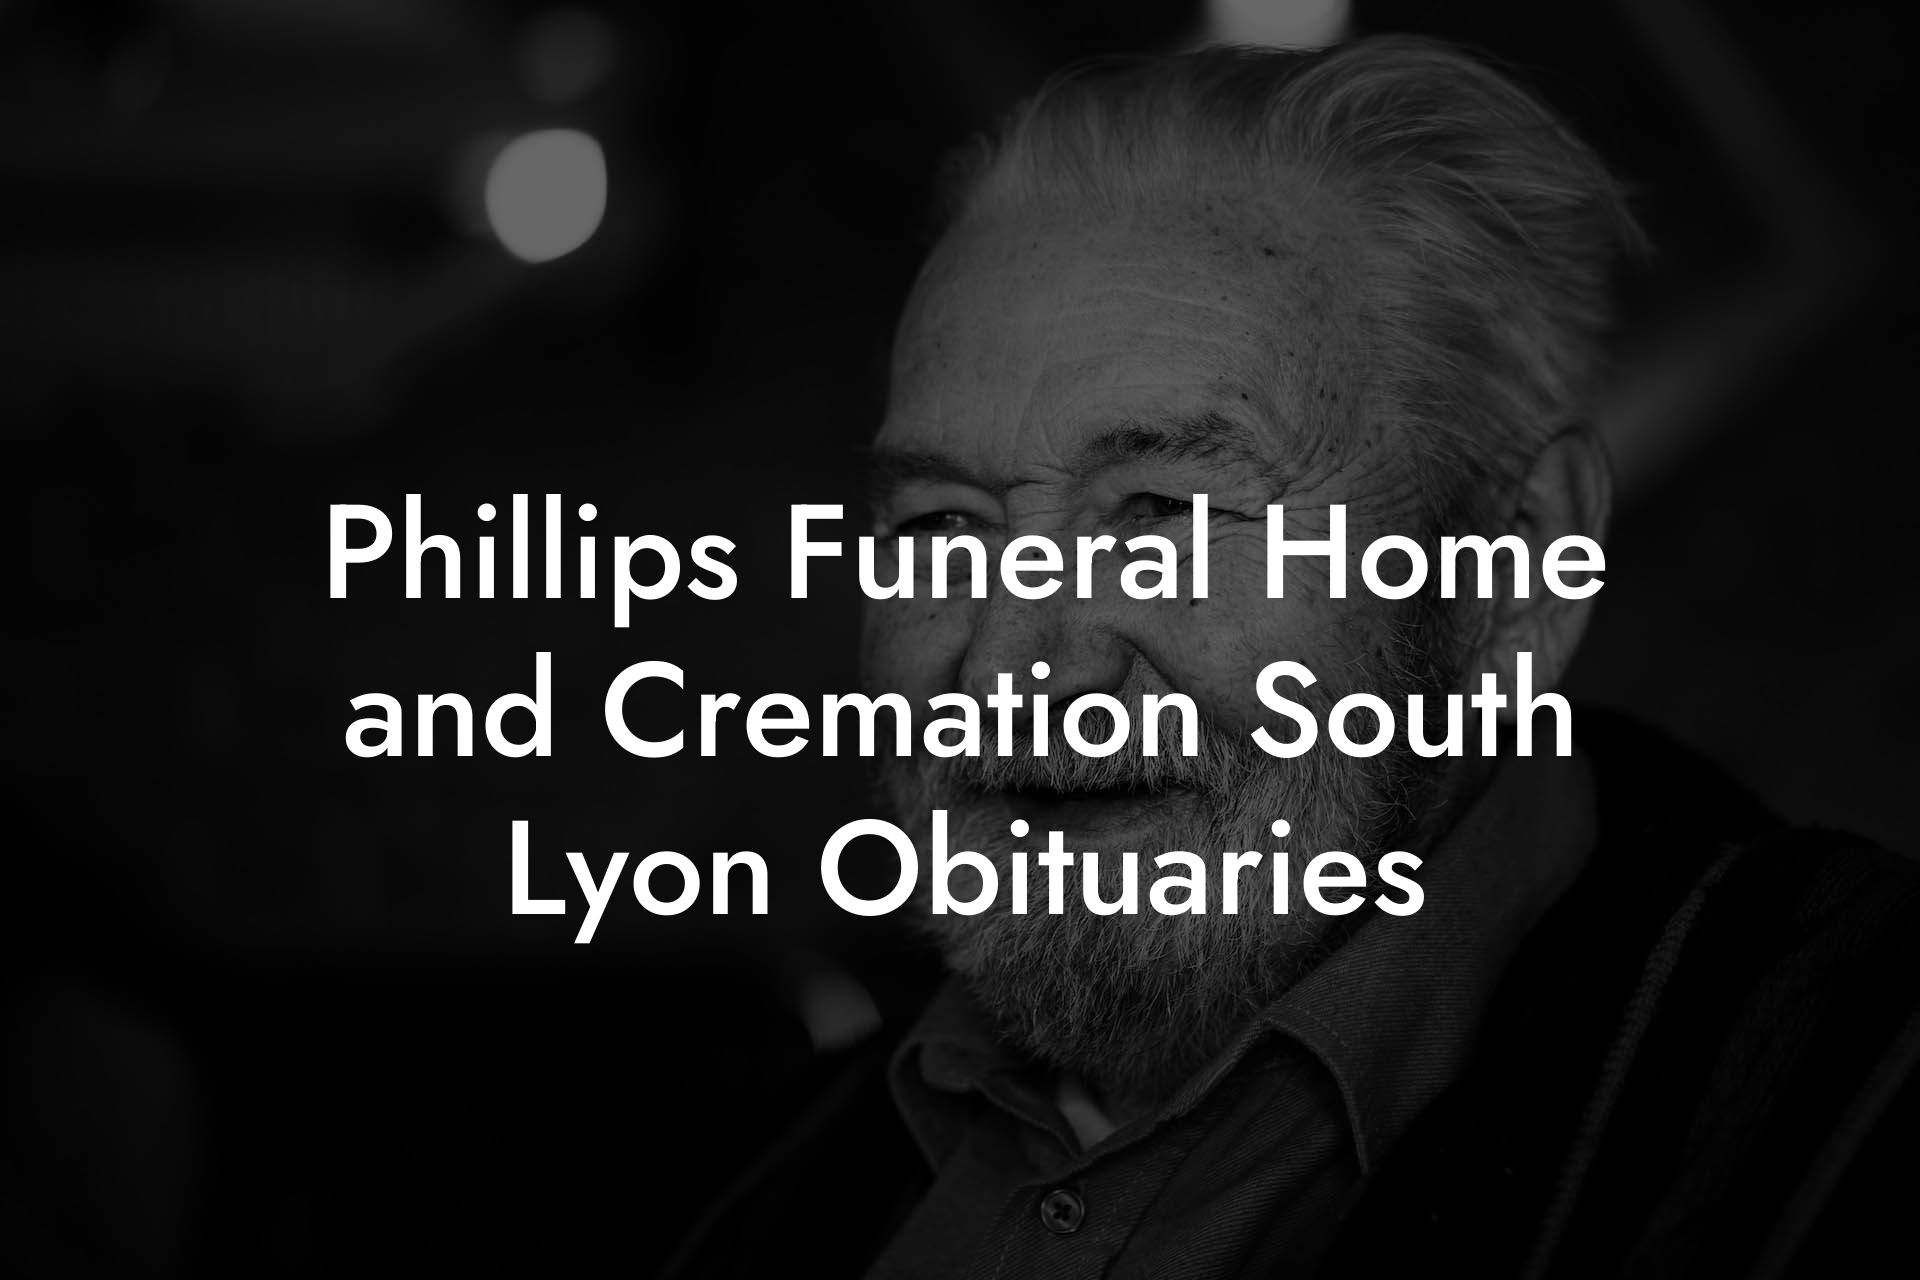 Phillips Funeral Home and Cremation South Lyon Obituaries - Eulogy ...